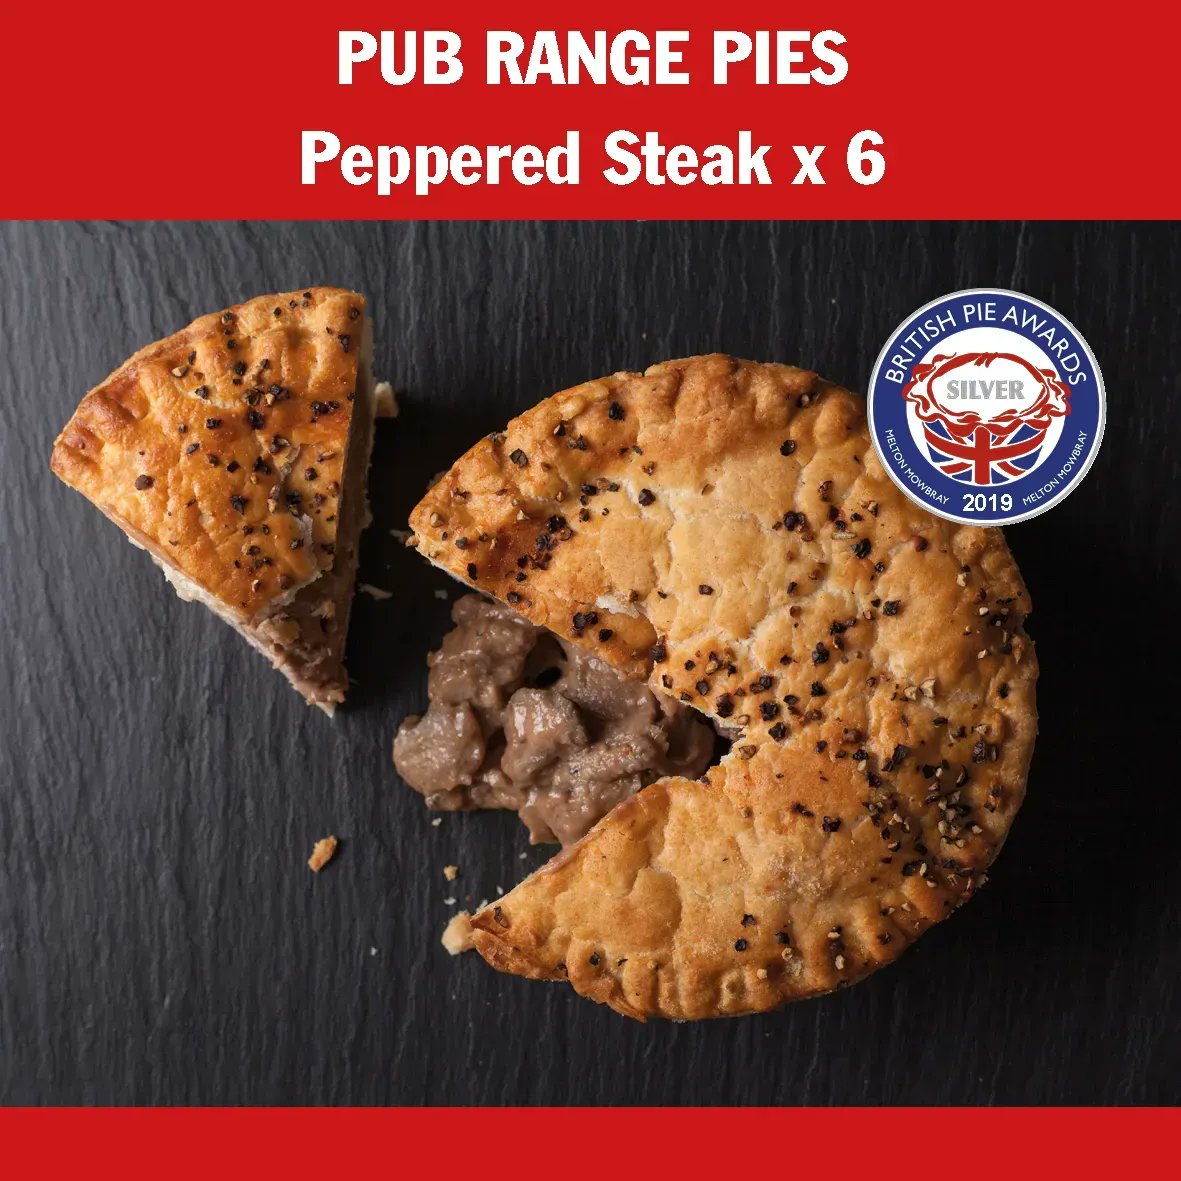 Peppered Steak & Mushroom Pub Range Pie

British farm beef cooked in a rich black pepper and mushroom beef sauce, topped with a cracked pepper puff pastry pie lid.

Perfect with a jug of hot gravy! ❤️

Shop conveniently online buff.ly/2WwxEkh

#Piesonline #Pies